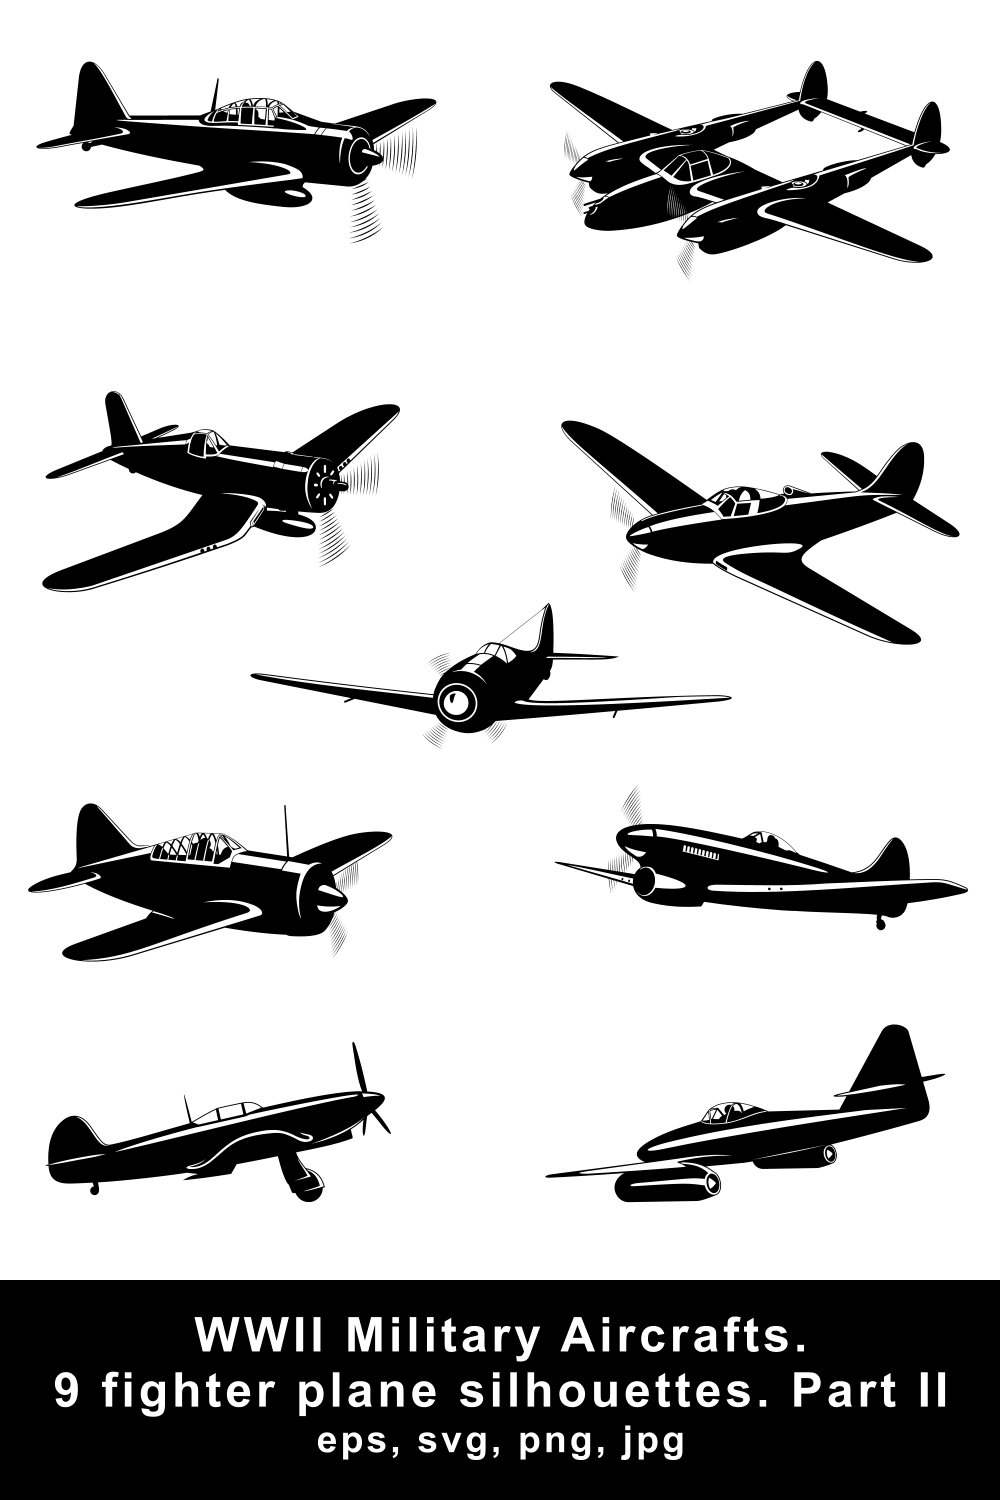 Fighter Planes WWII Aircrafts Silhouettes pinterest image.